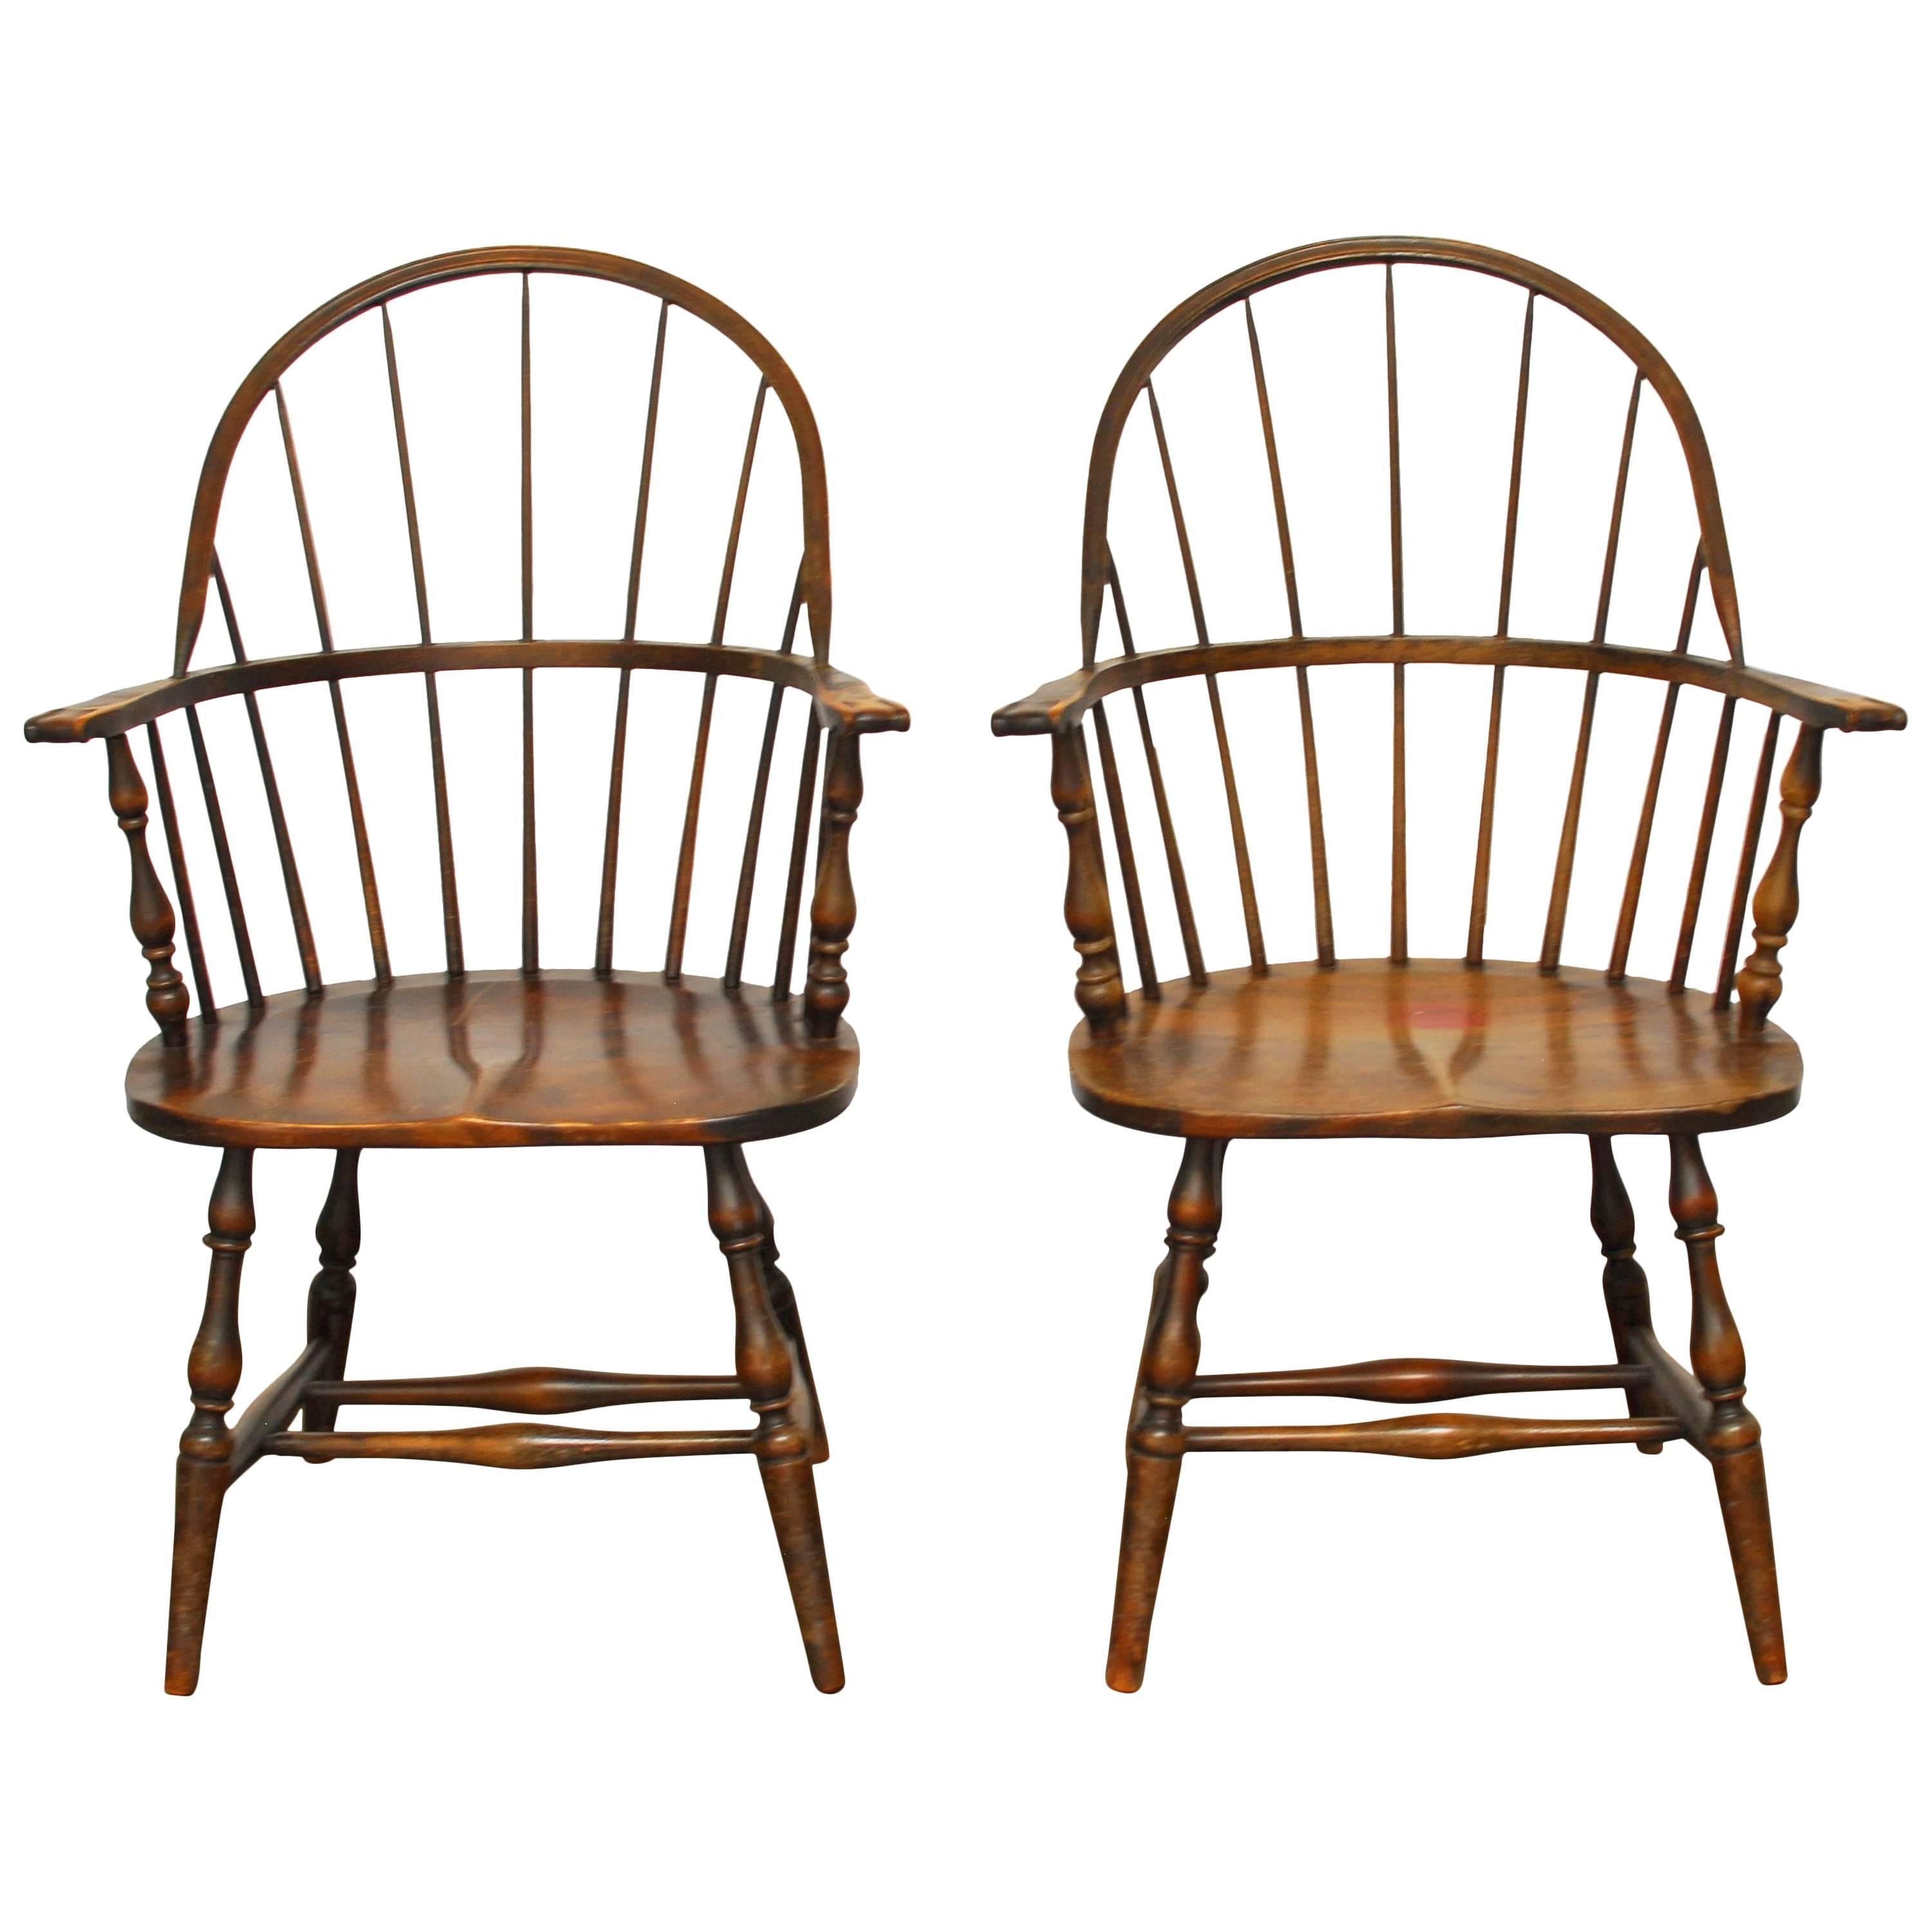 19th Century Sack Back Windsor Chairs